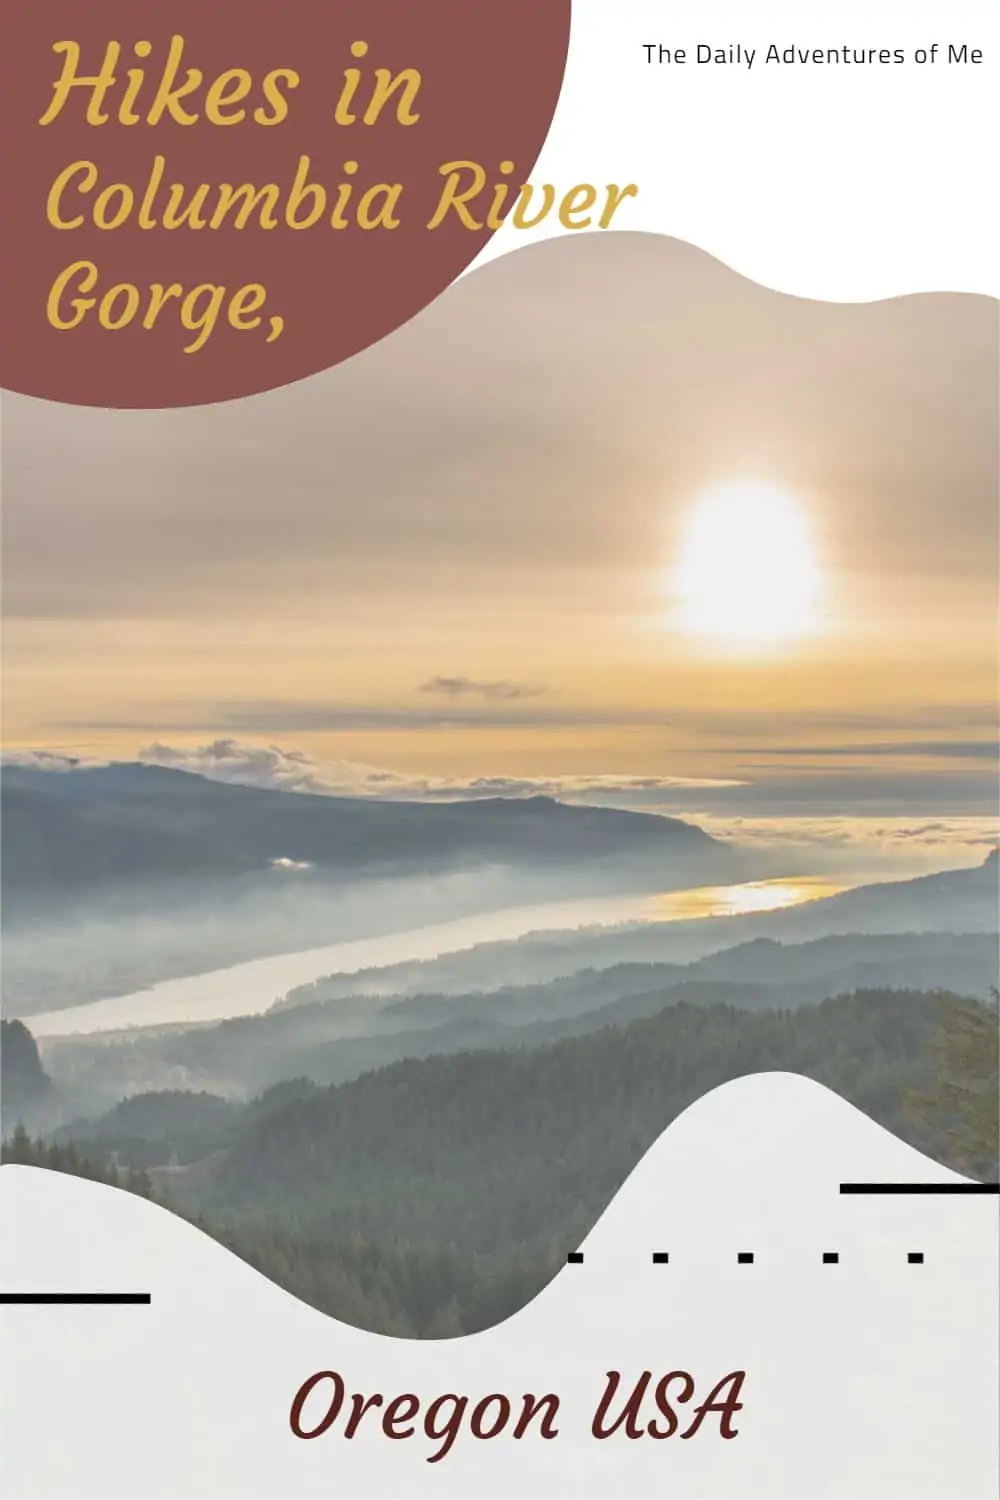 Read on for the 10 best family hikes in Columbia River Gorge, including waterfall hikes. #familyhikes #PNWHikes #hiking #Oregon